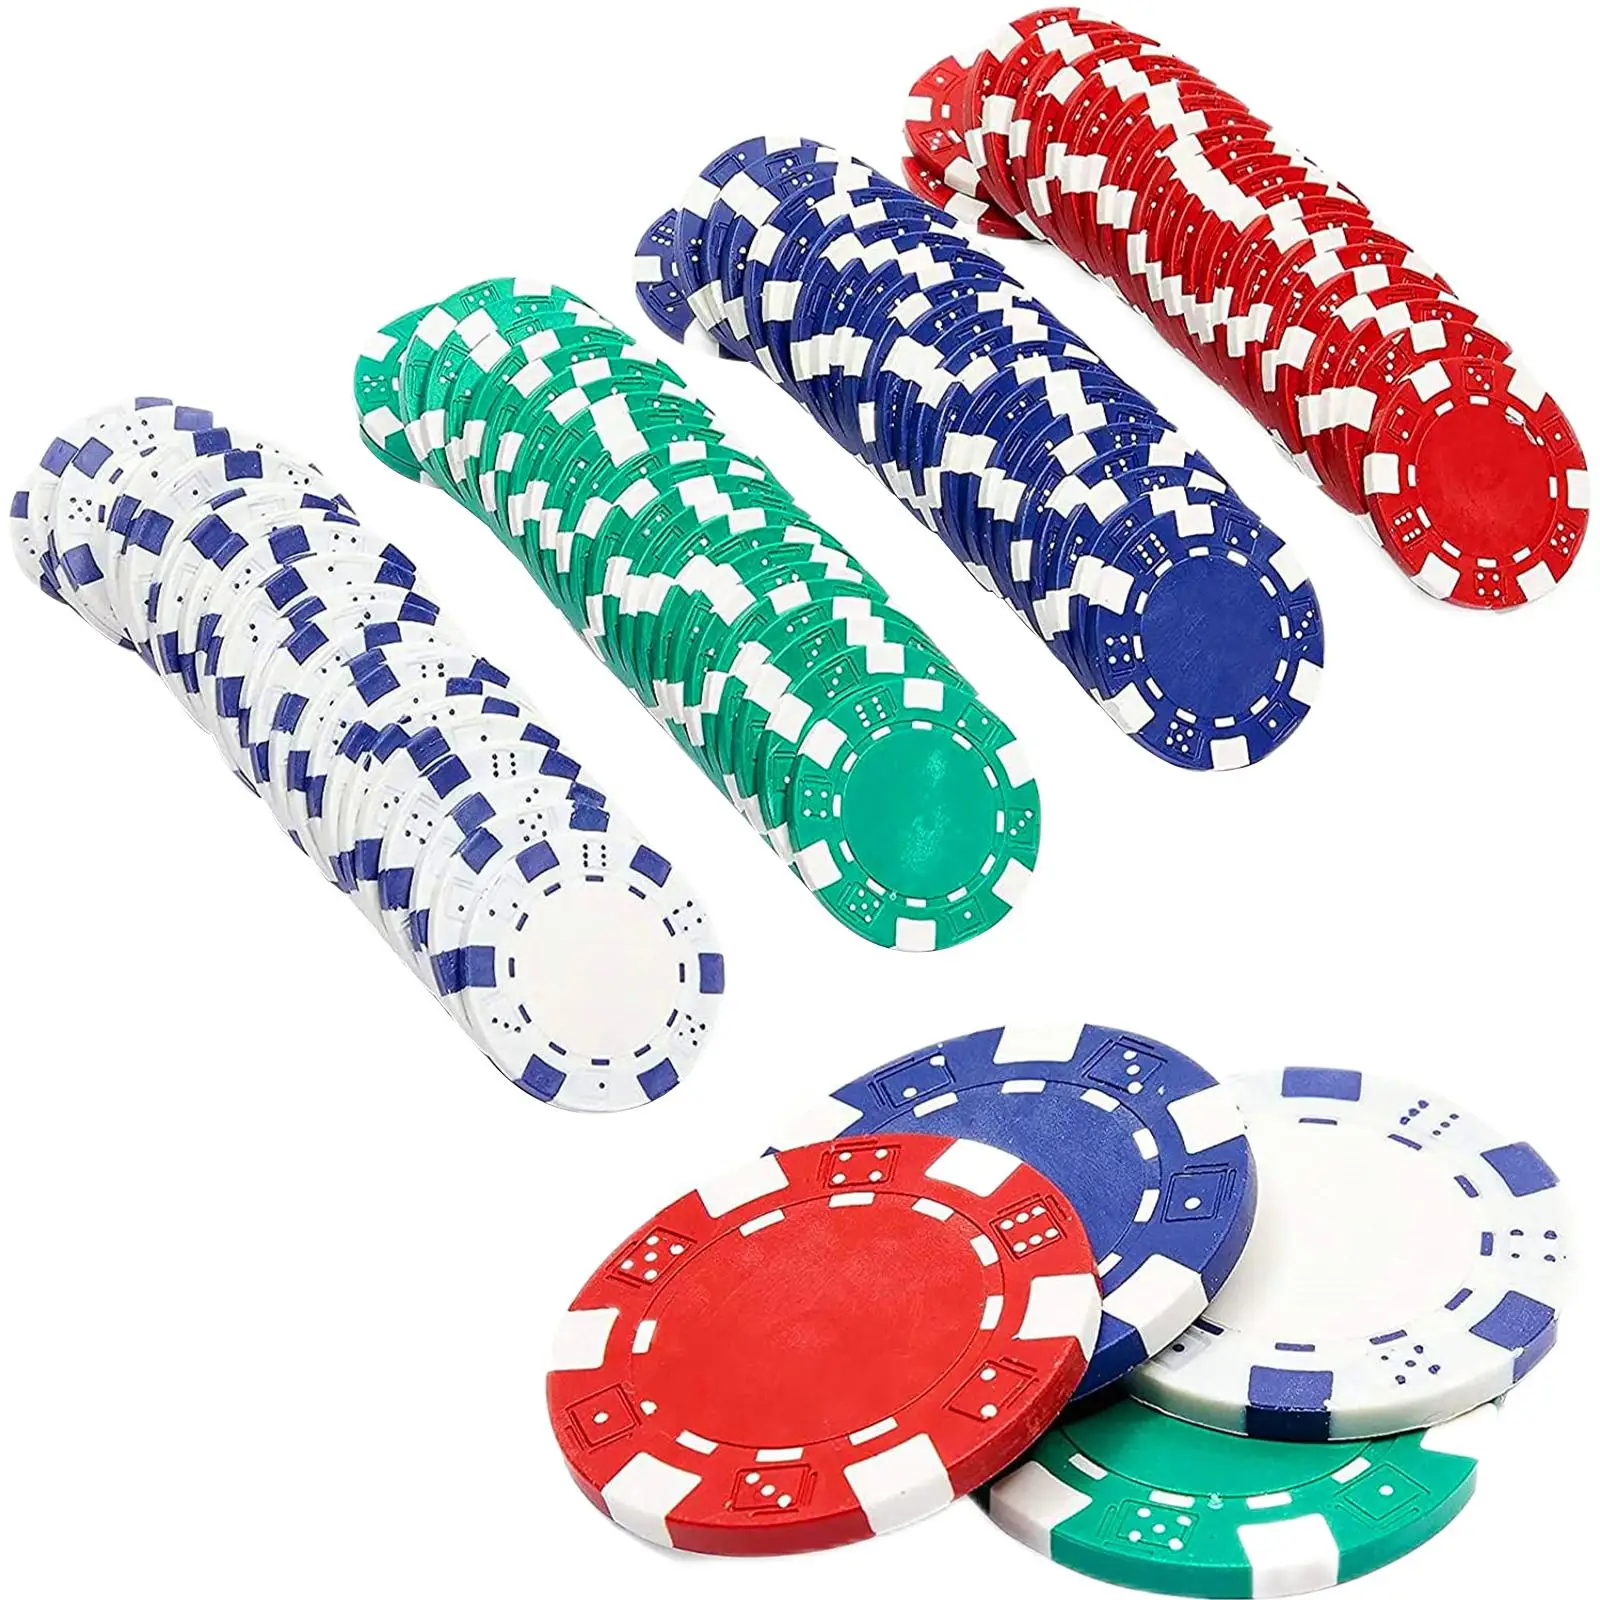 100x ABS Poker Chips Premium Durable Game Tokens Counting Discs Bingo Chips